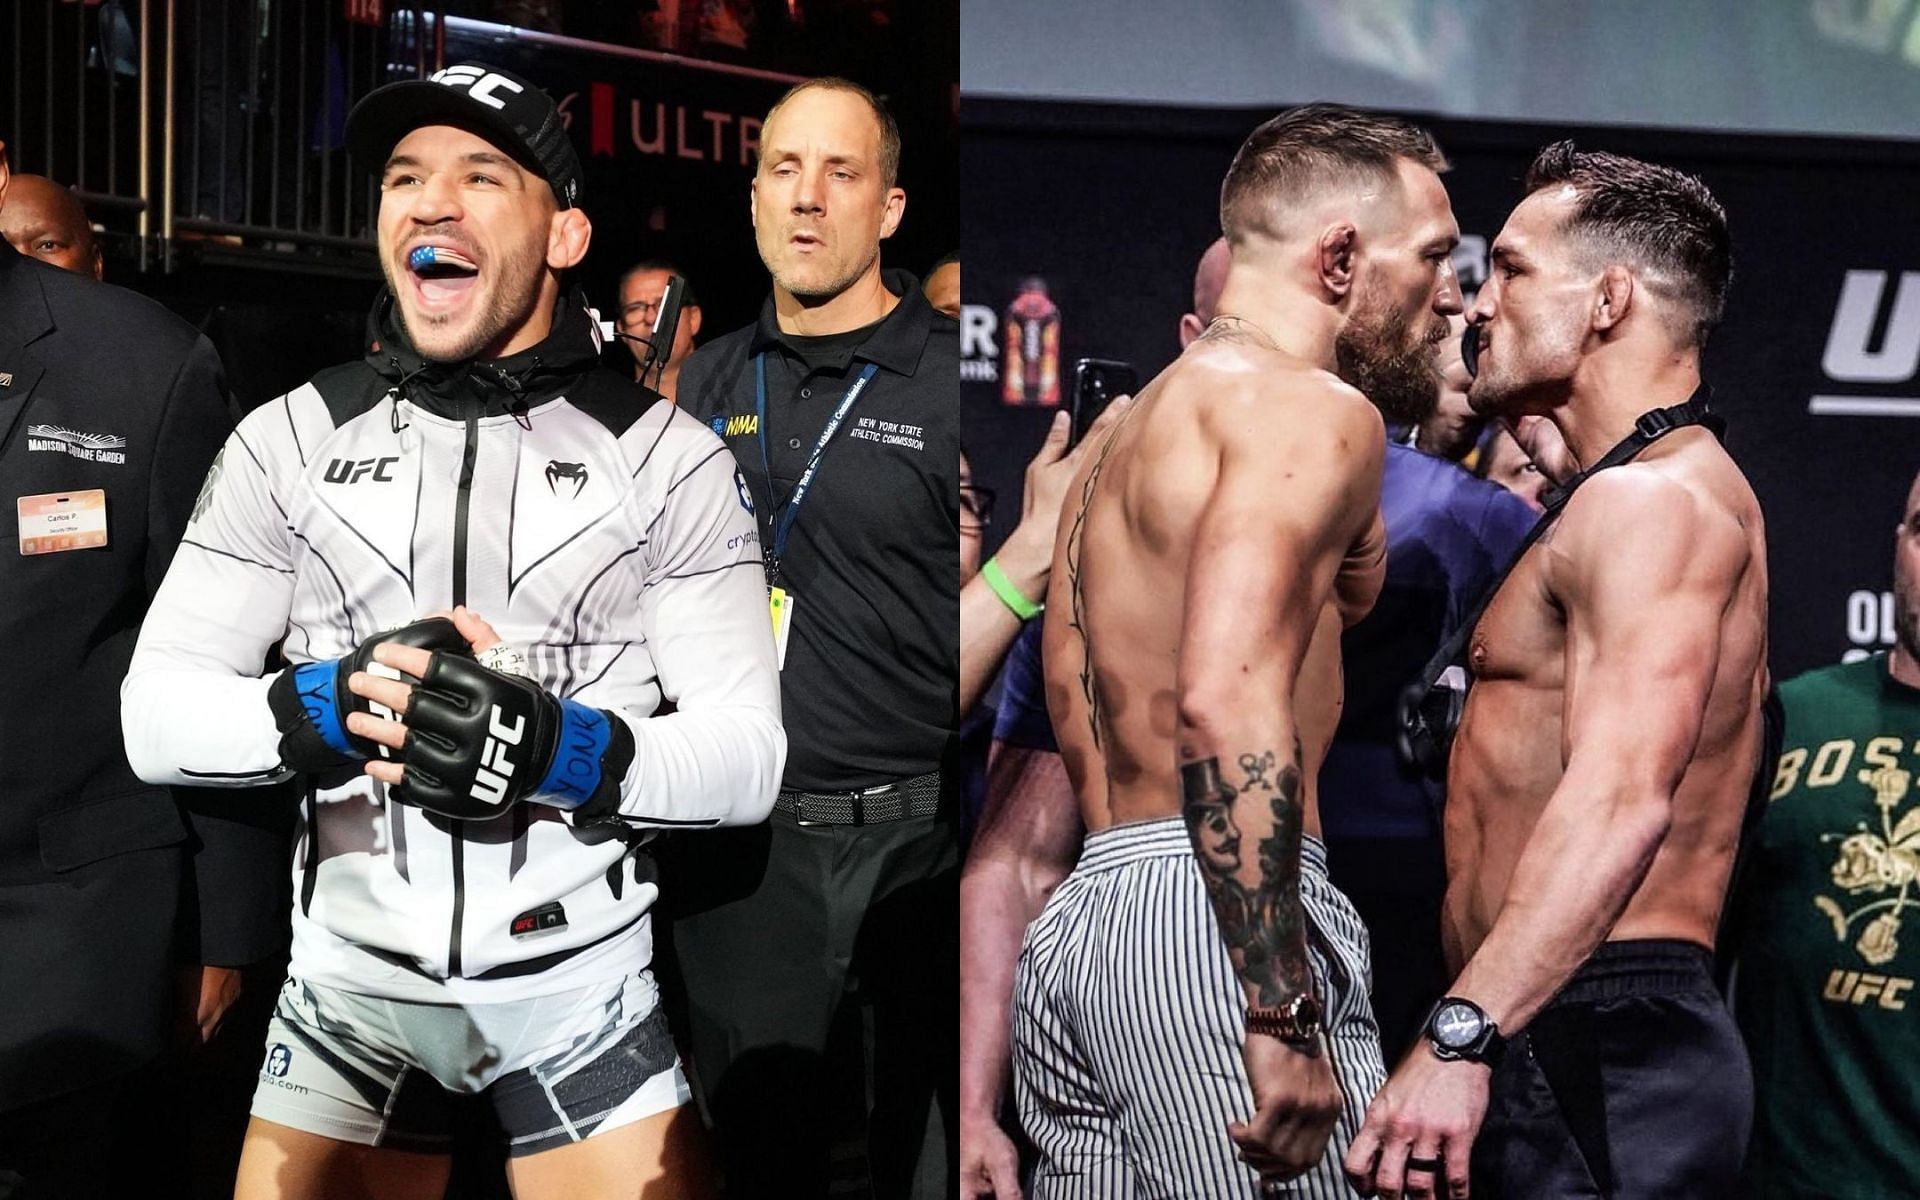 Michael Chandler making a ringwalk (left) and Michael Chandler facing off against Conor McGregor (right) (Images courtesy @mikechandlermma on Instagram)